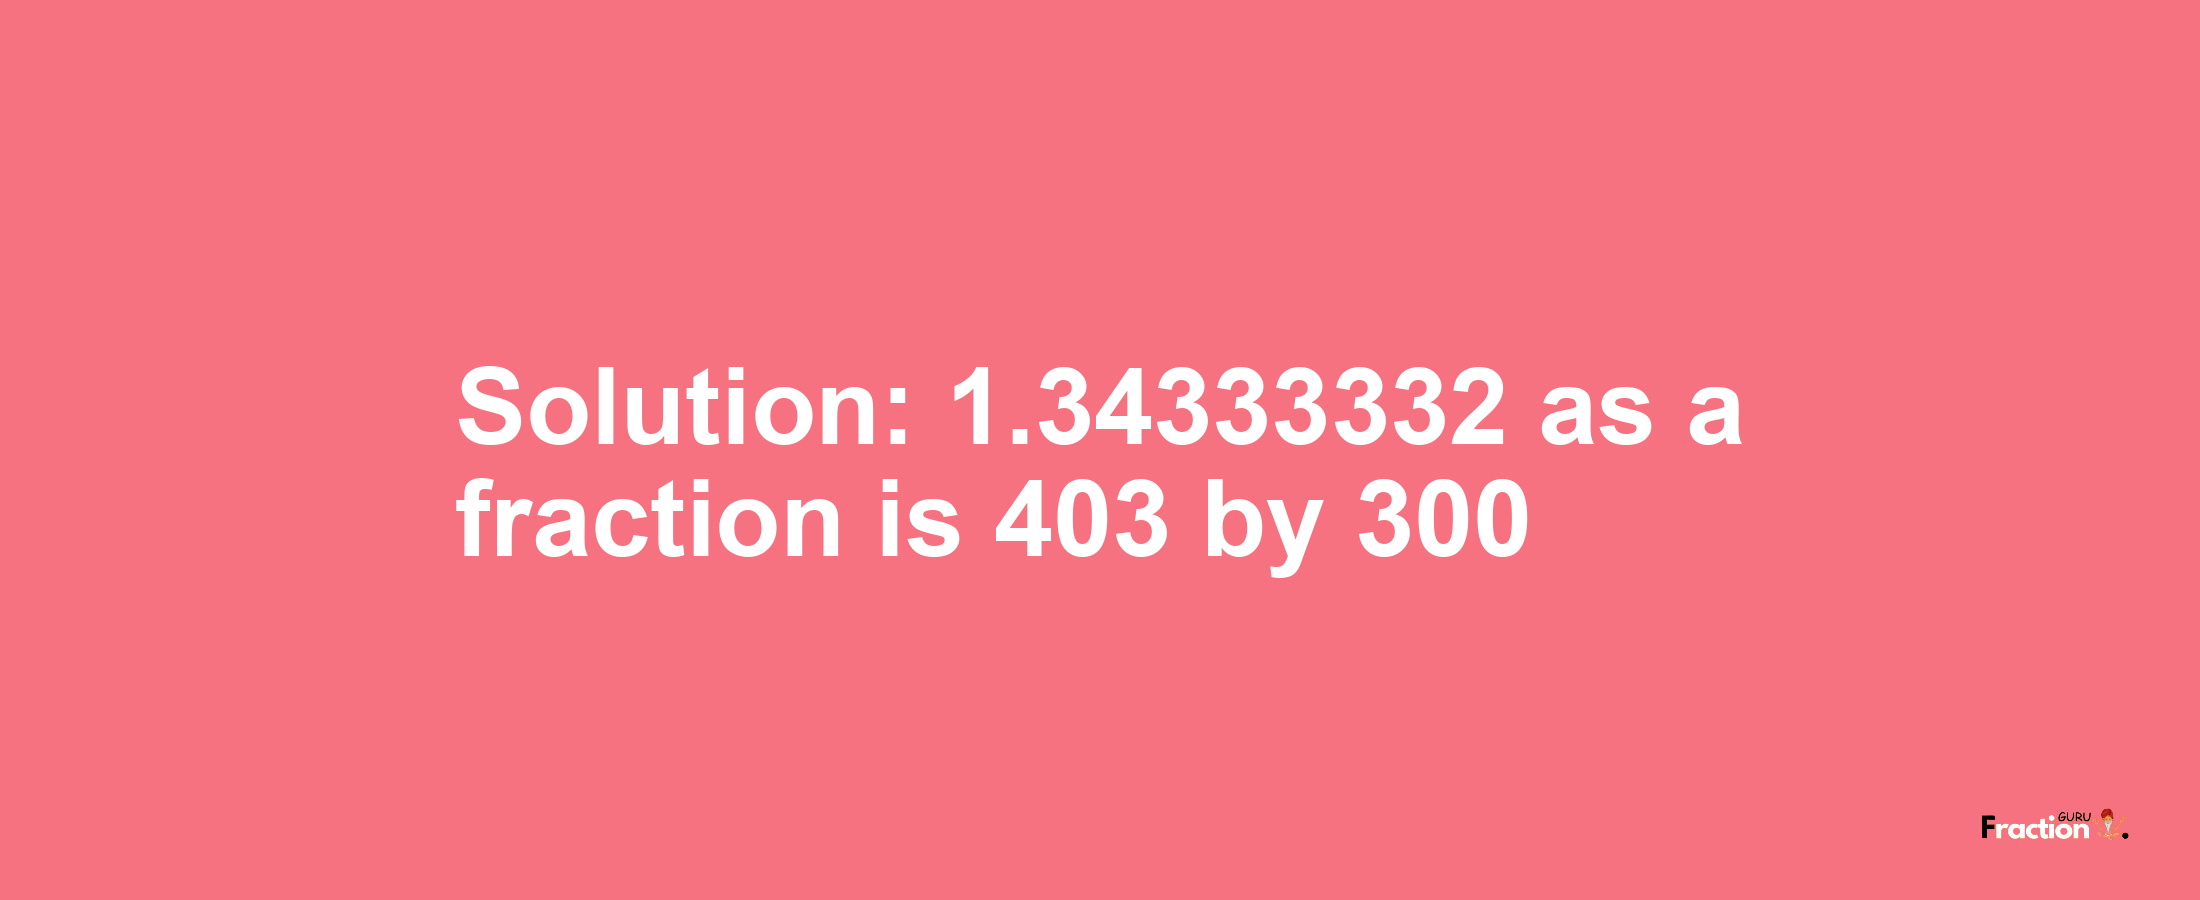 Solution:1.34333332 as a fraction is 403/300